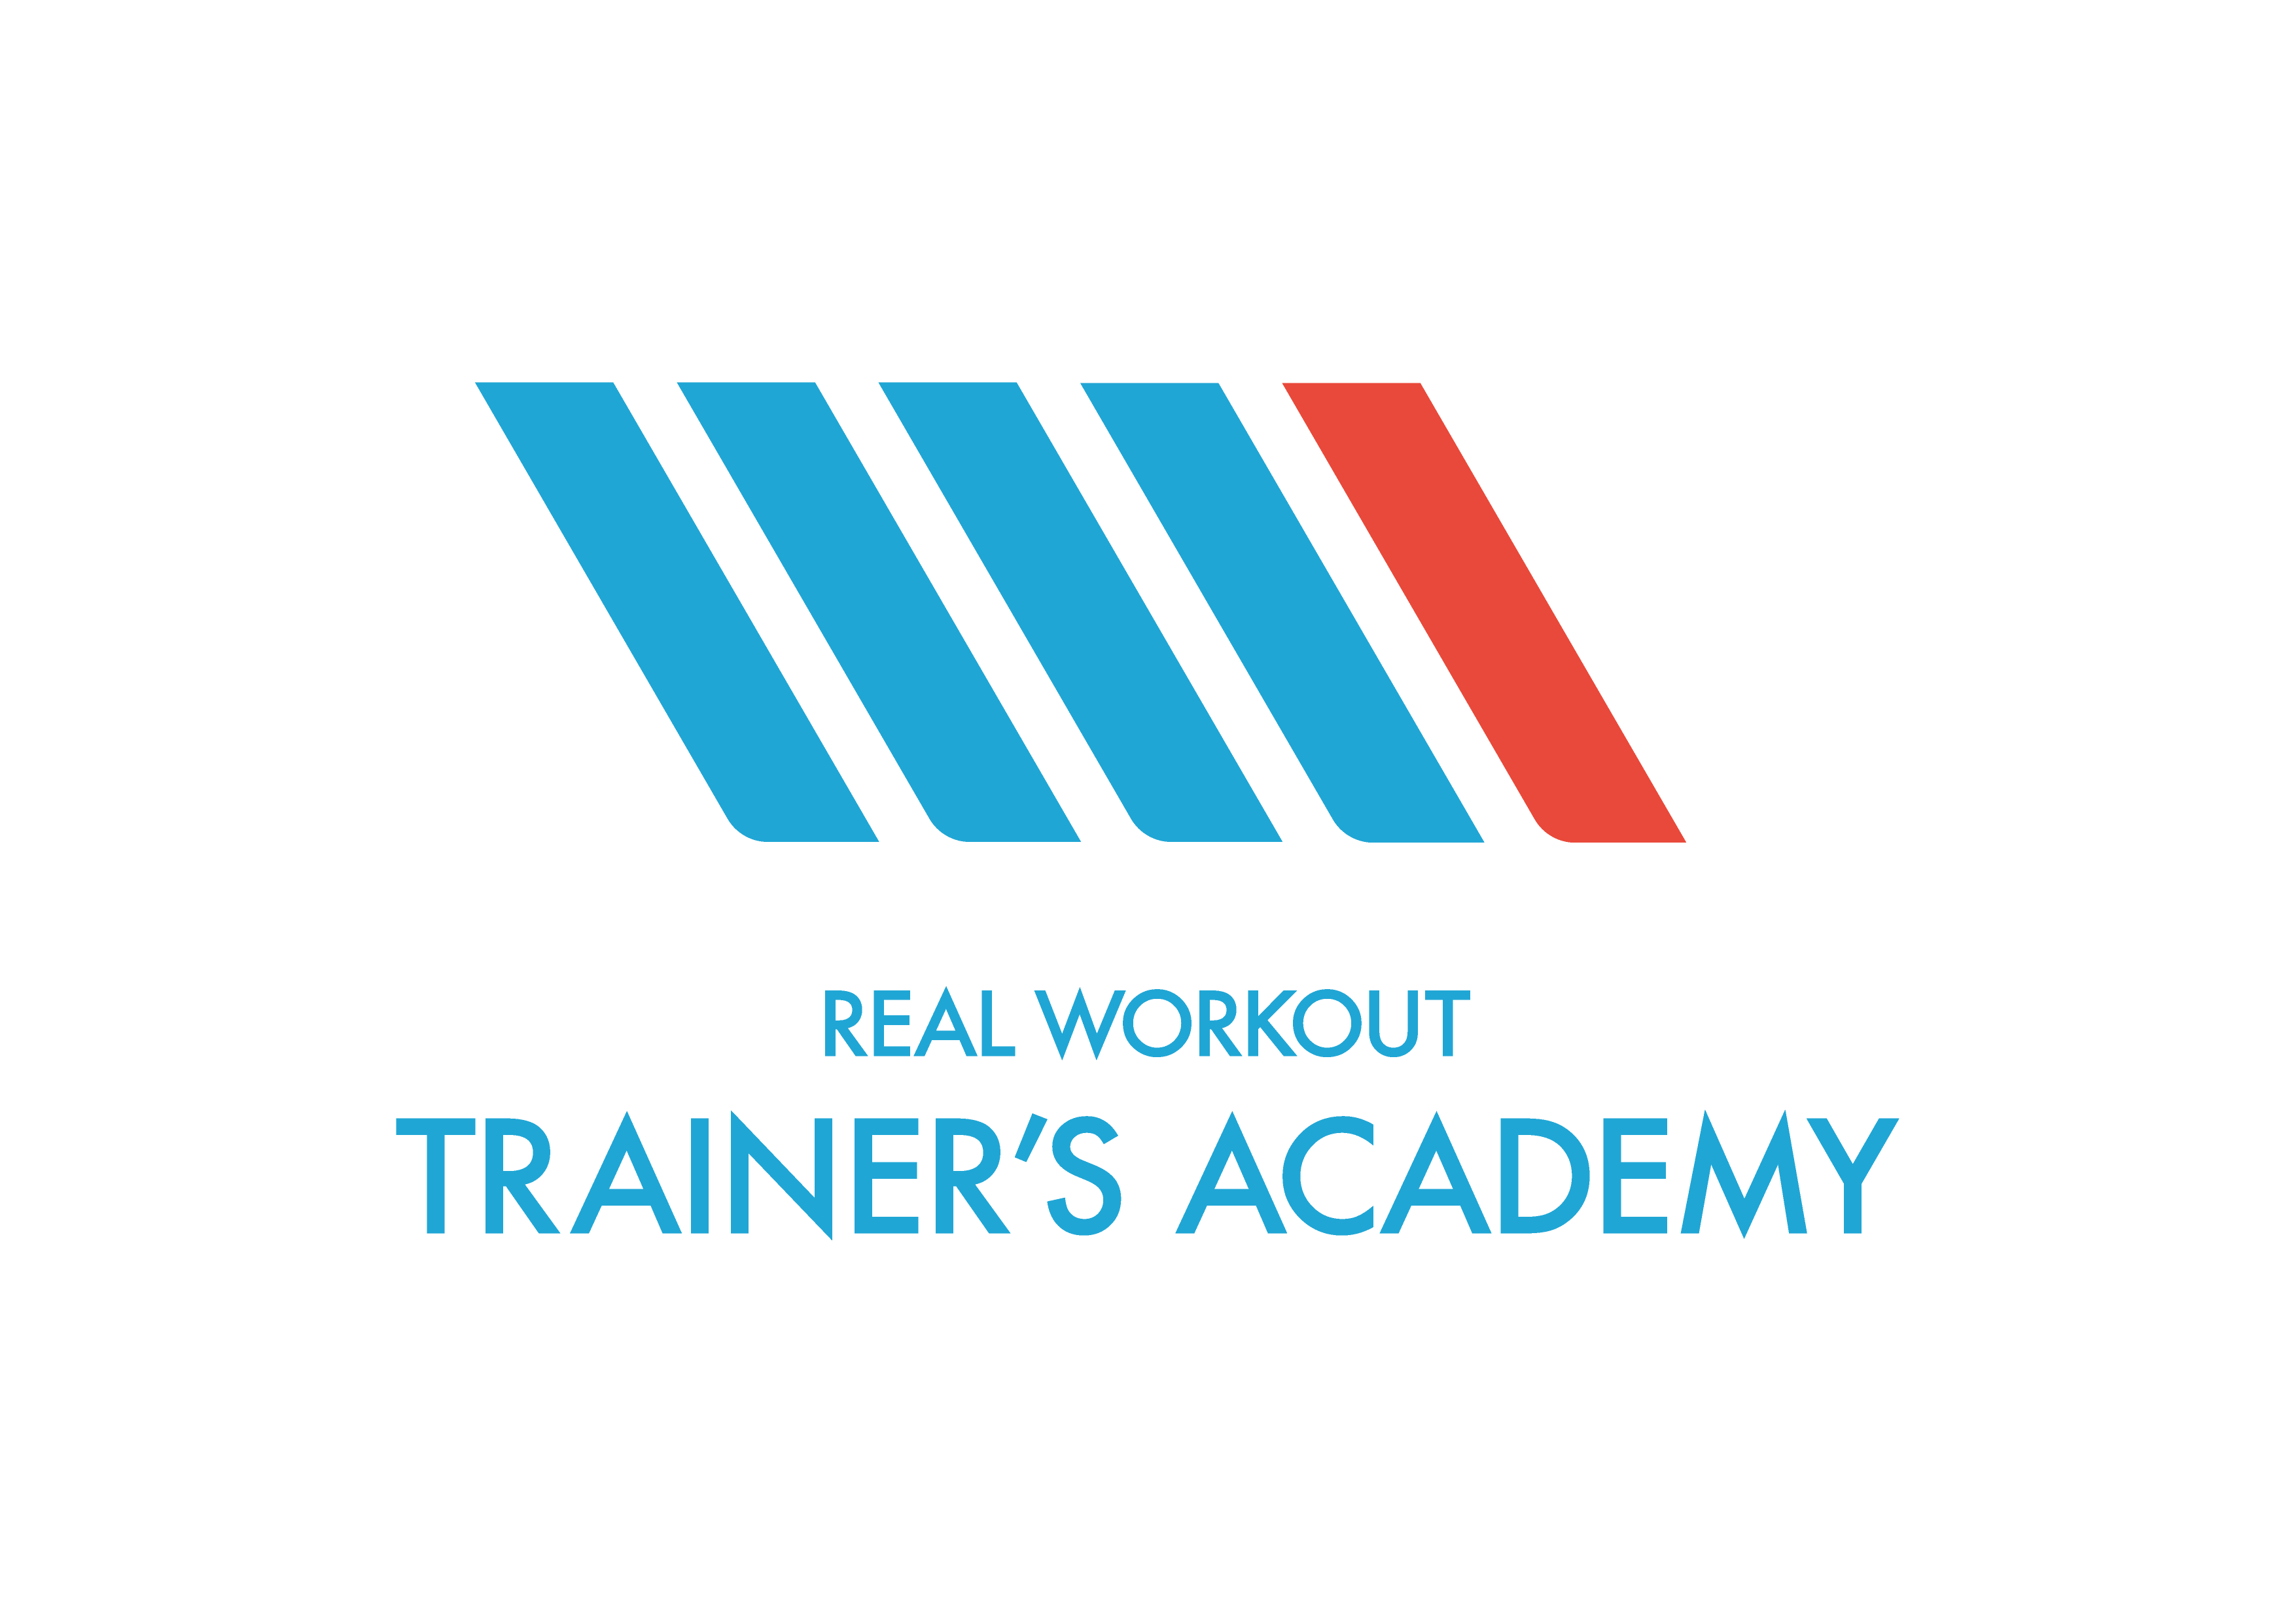 REAL WORKOUTTRAINER'S ACADEMY